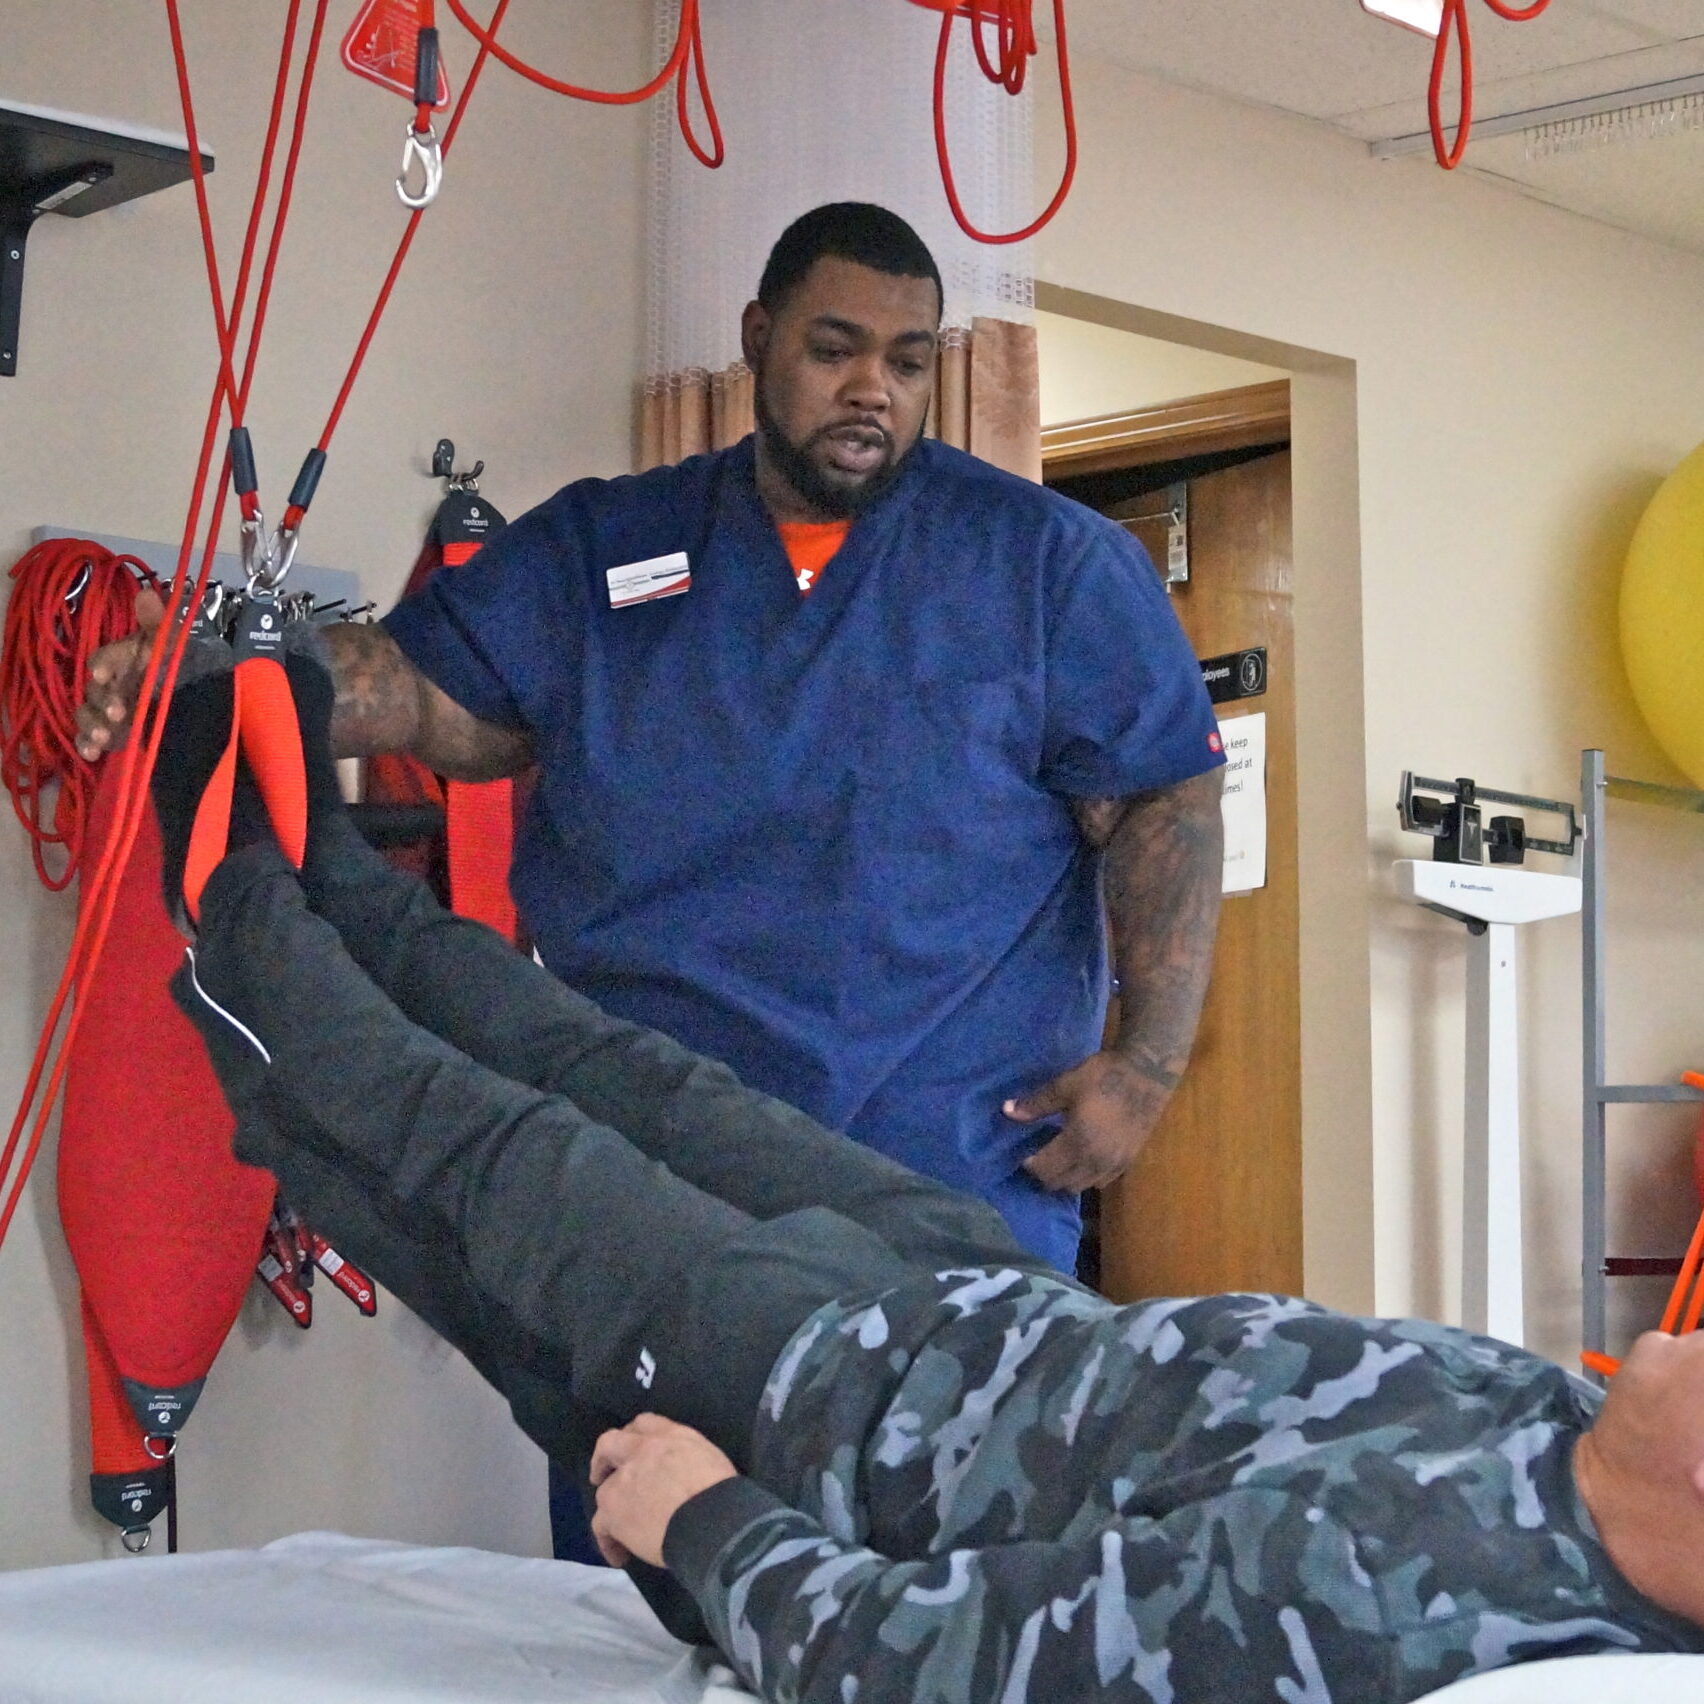 Image of Vocational Therapy Client training to be a nurse.